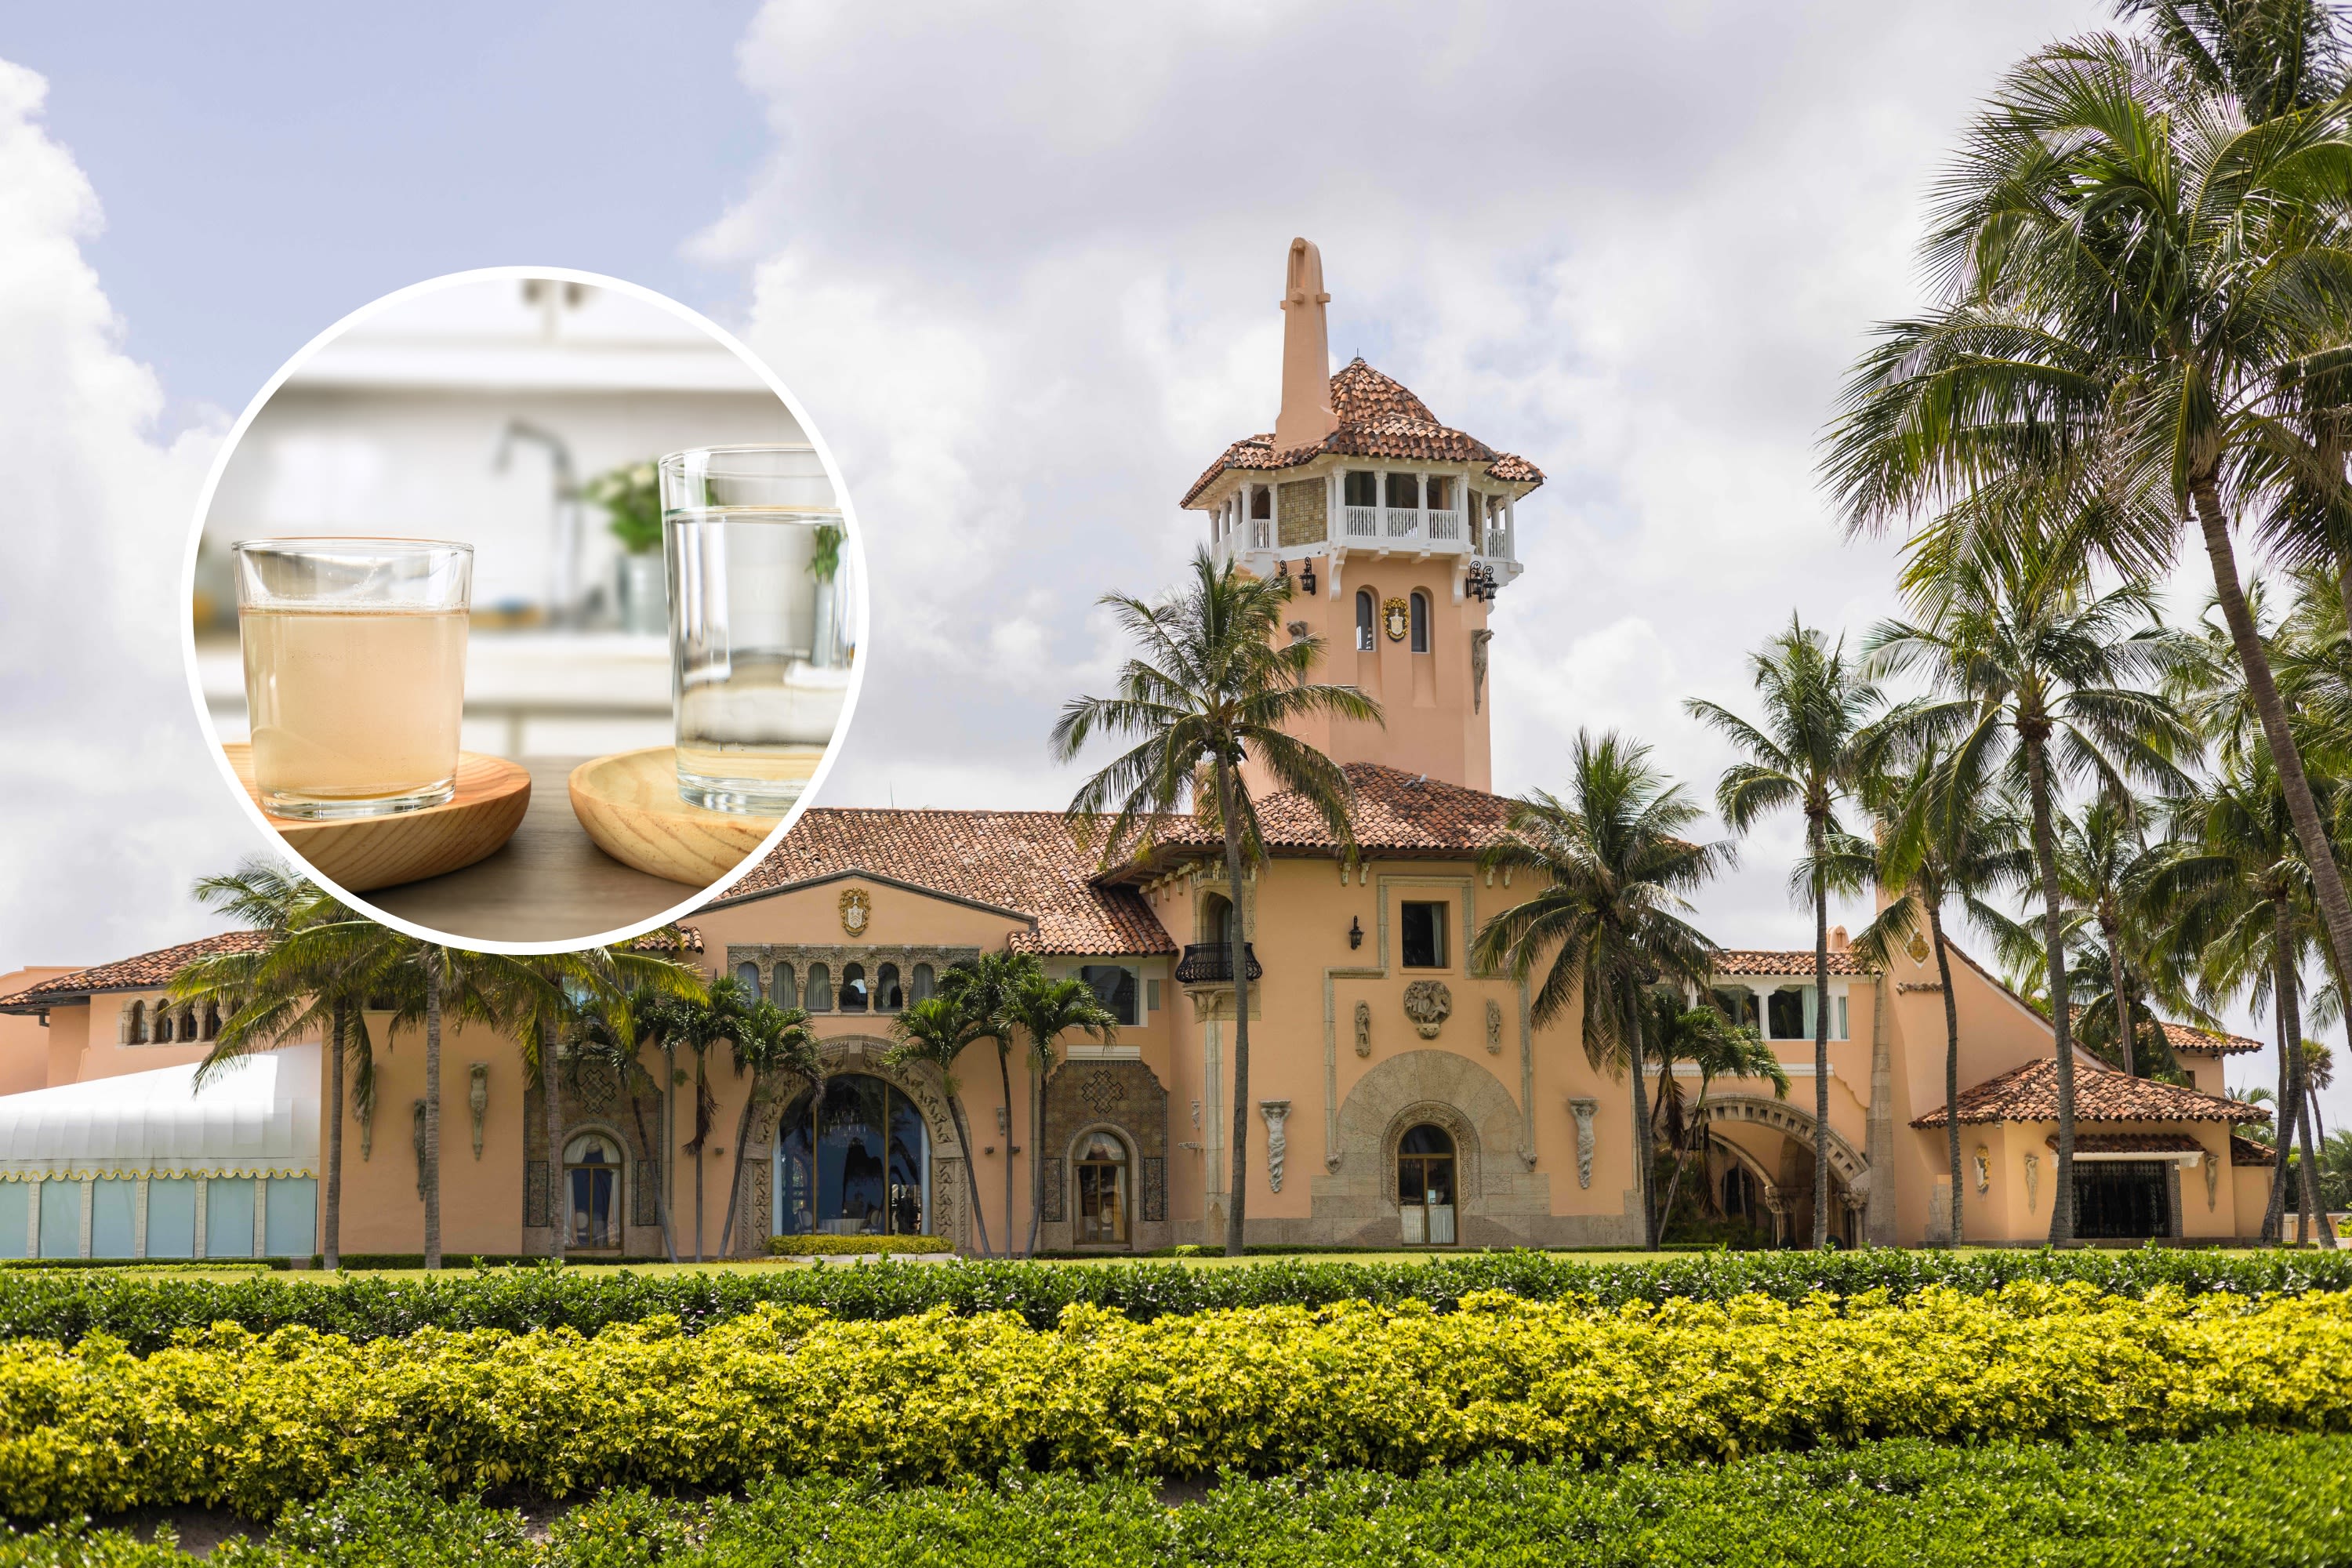 Drinking water warning issued for Mar-a-Lago area